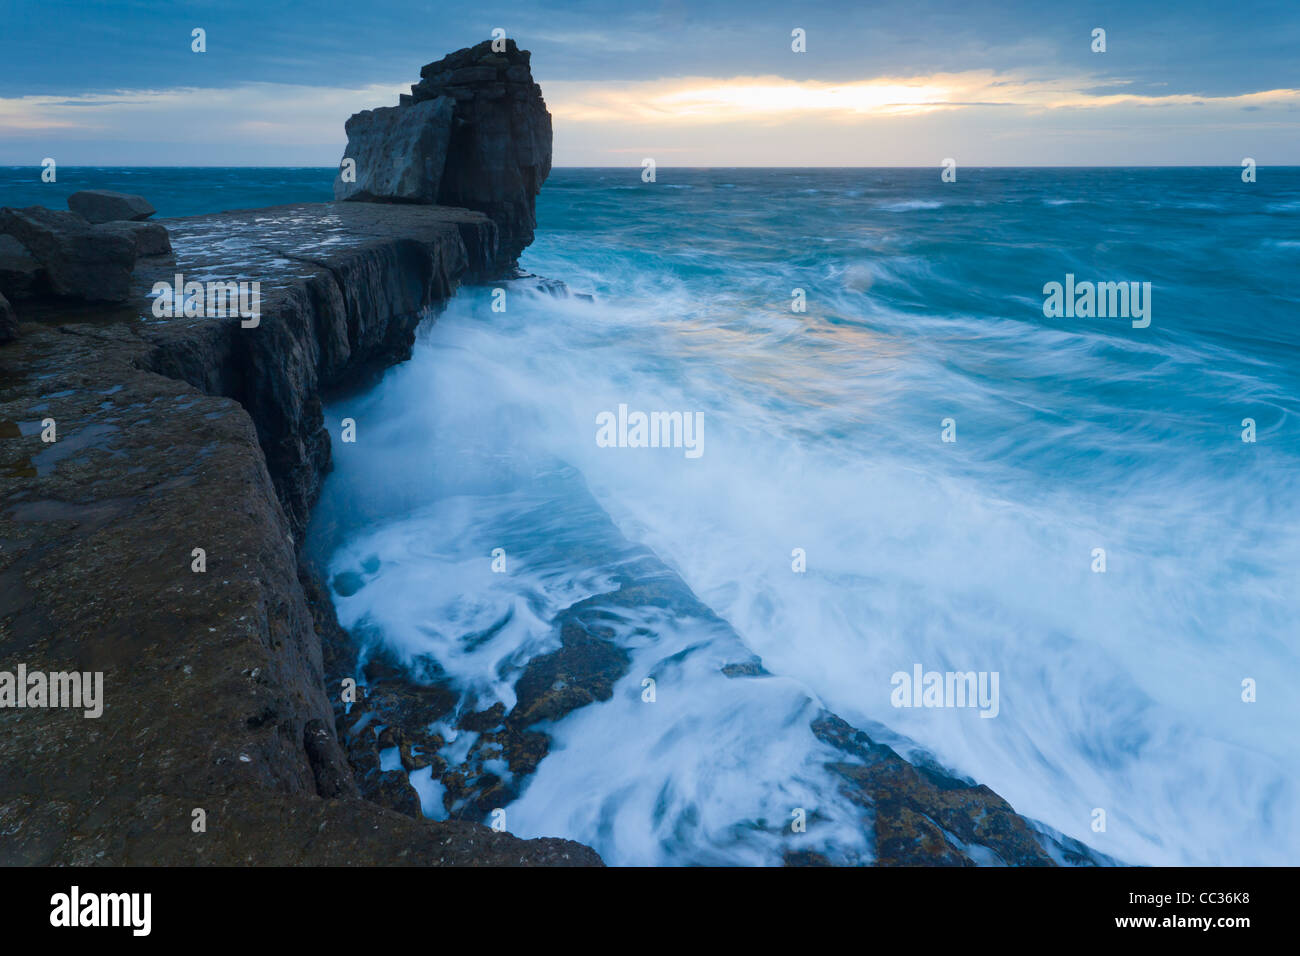 Waves crash over Pulpit Rock, at the tip of Portland Bill, Dorset, as the sun sets in November. Stock Photo